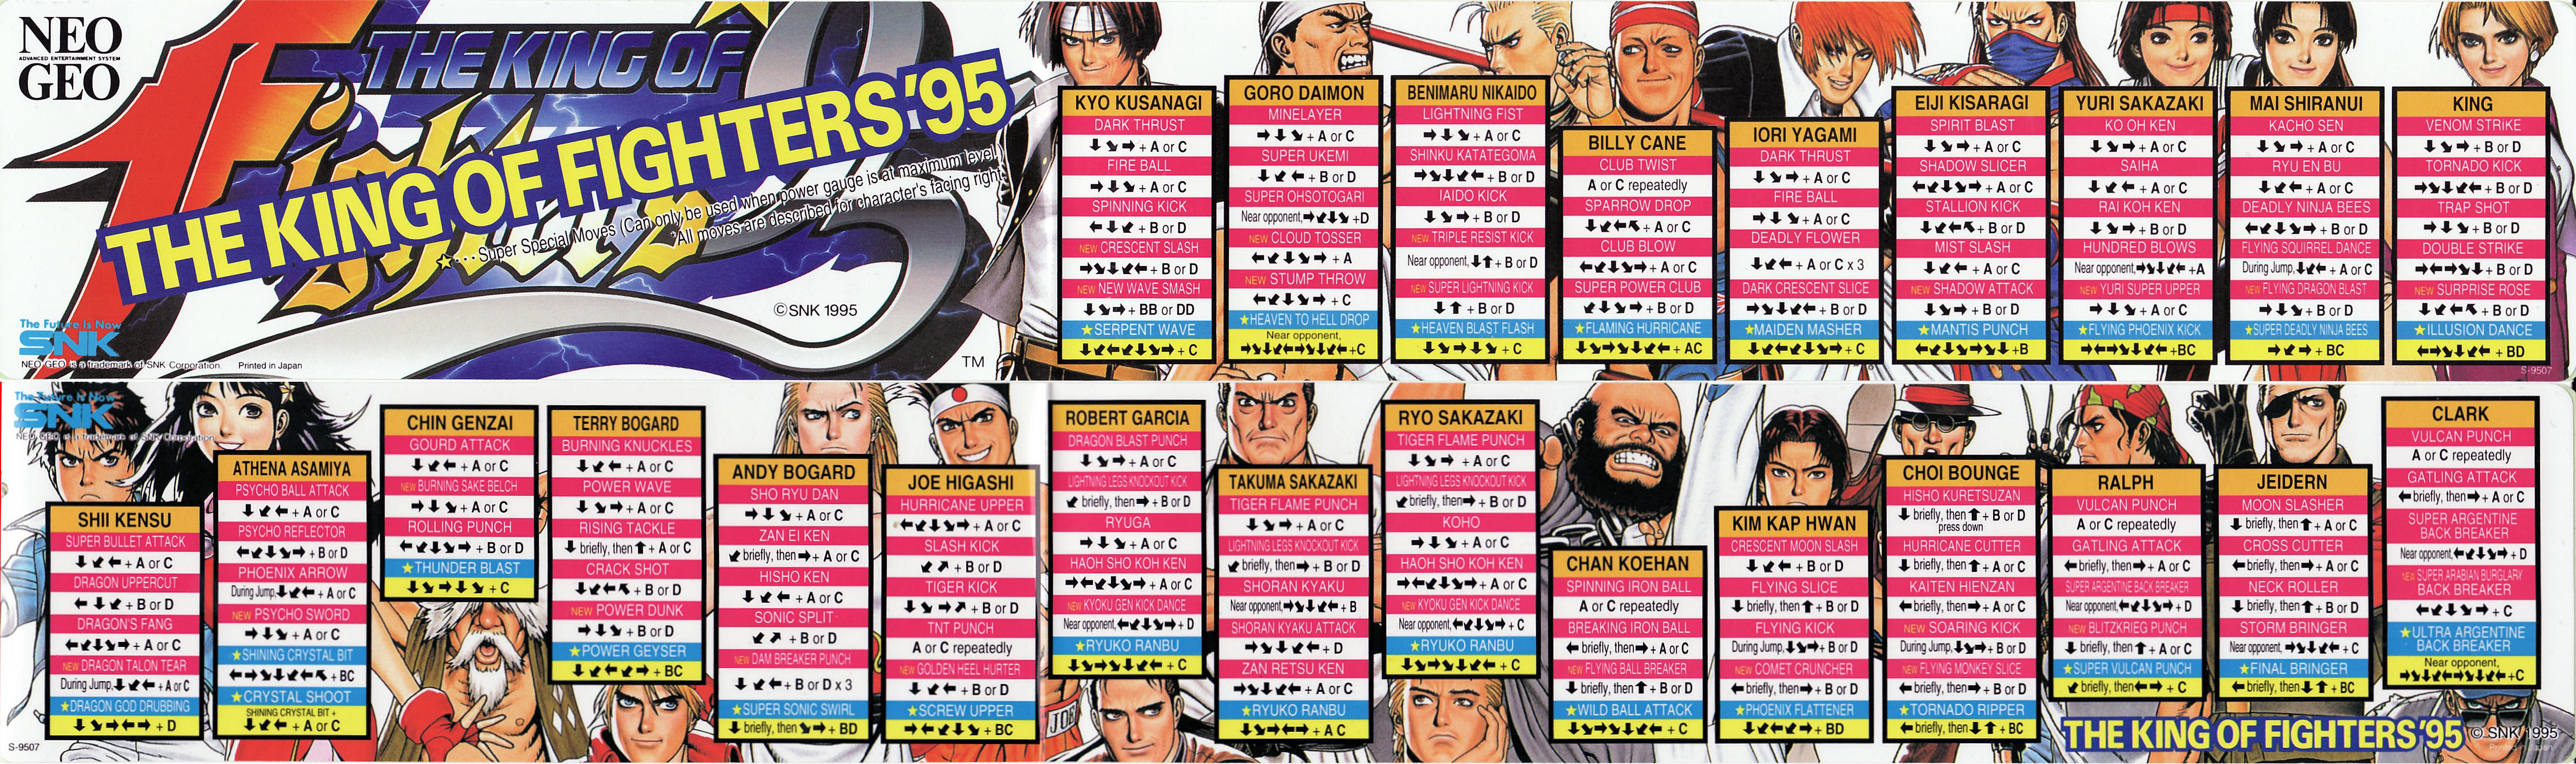 the king of fighter 97 arcade moves list